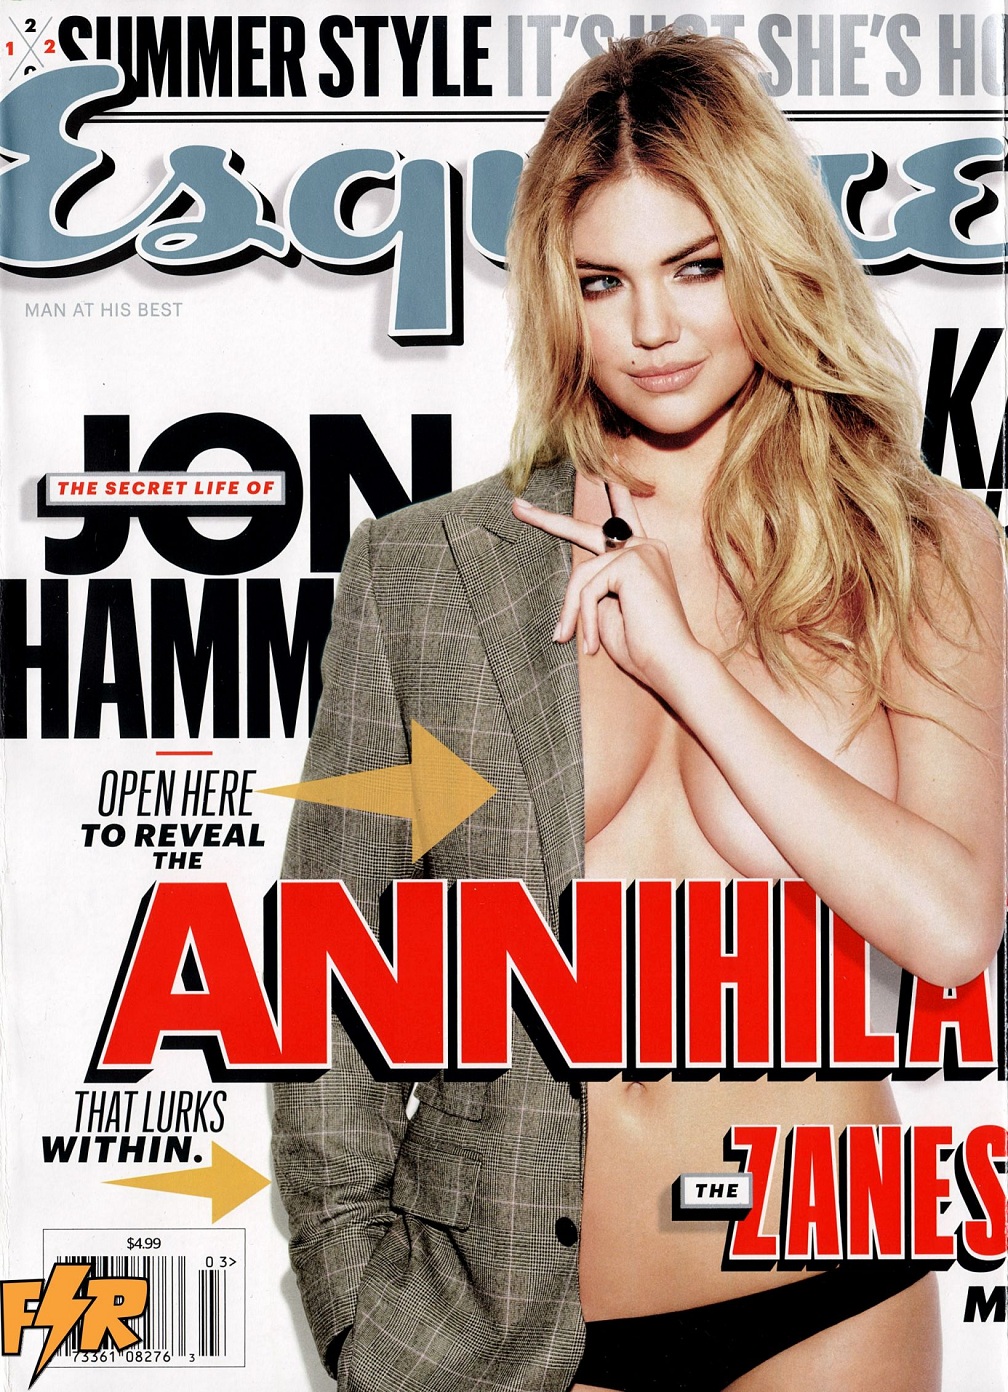 Kate Upton looking sexy in Esquire Magazine